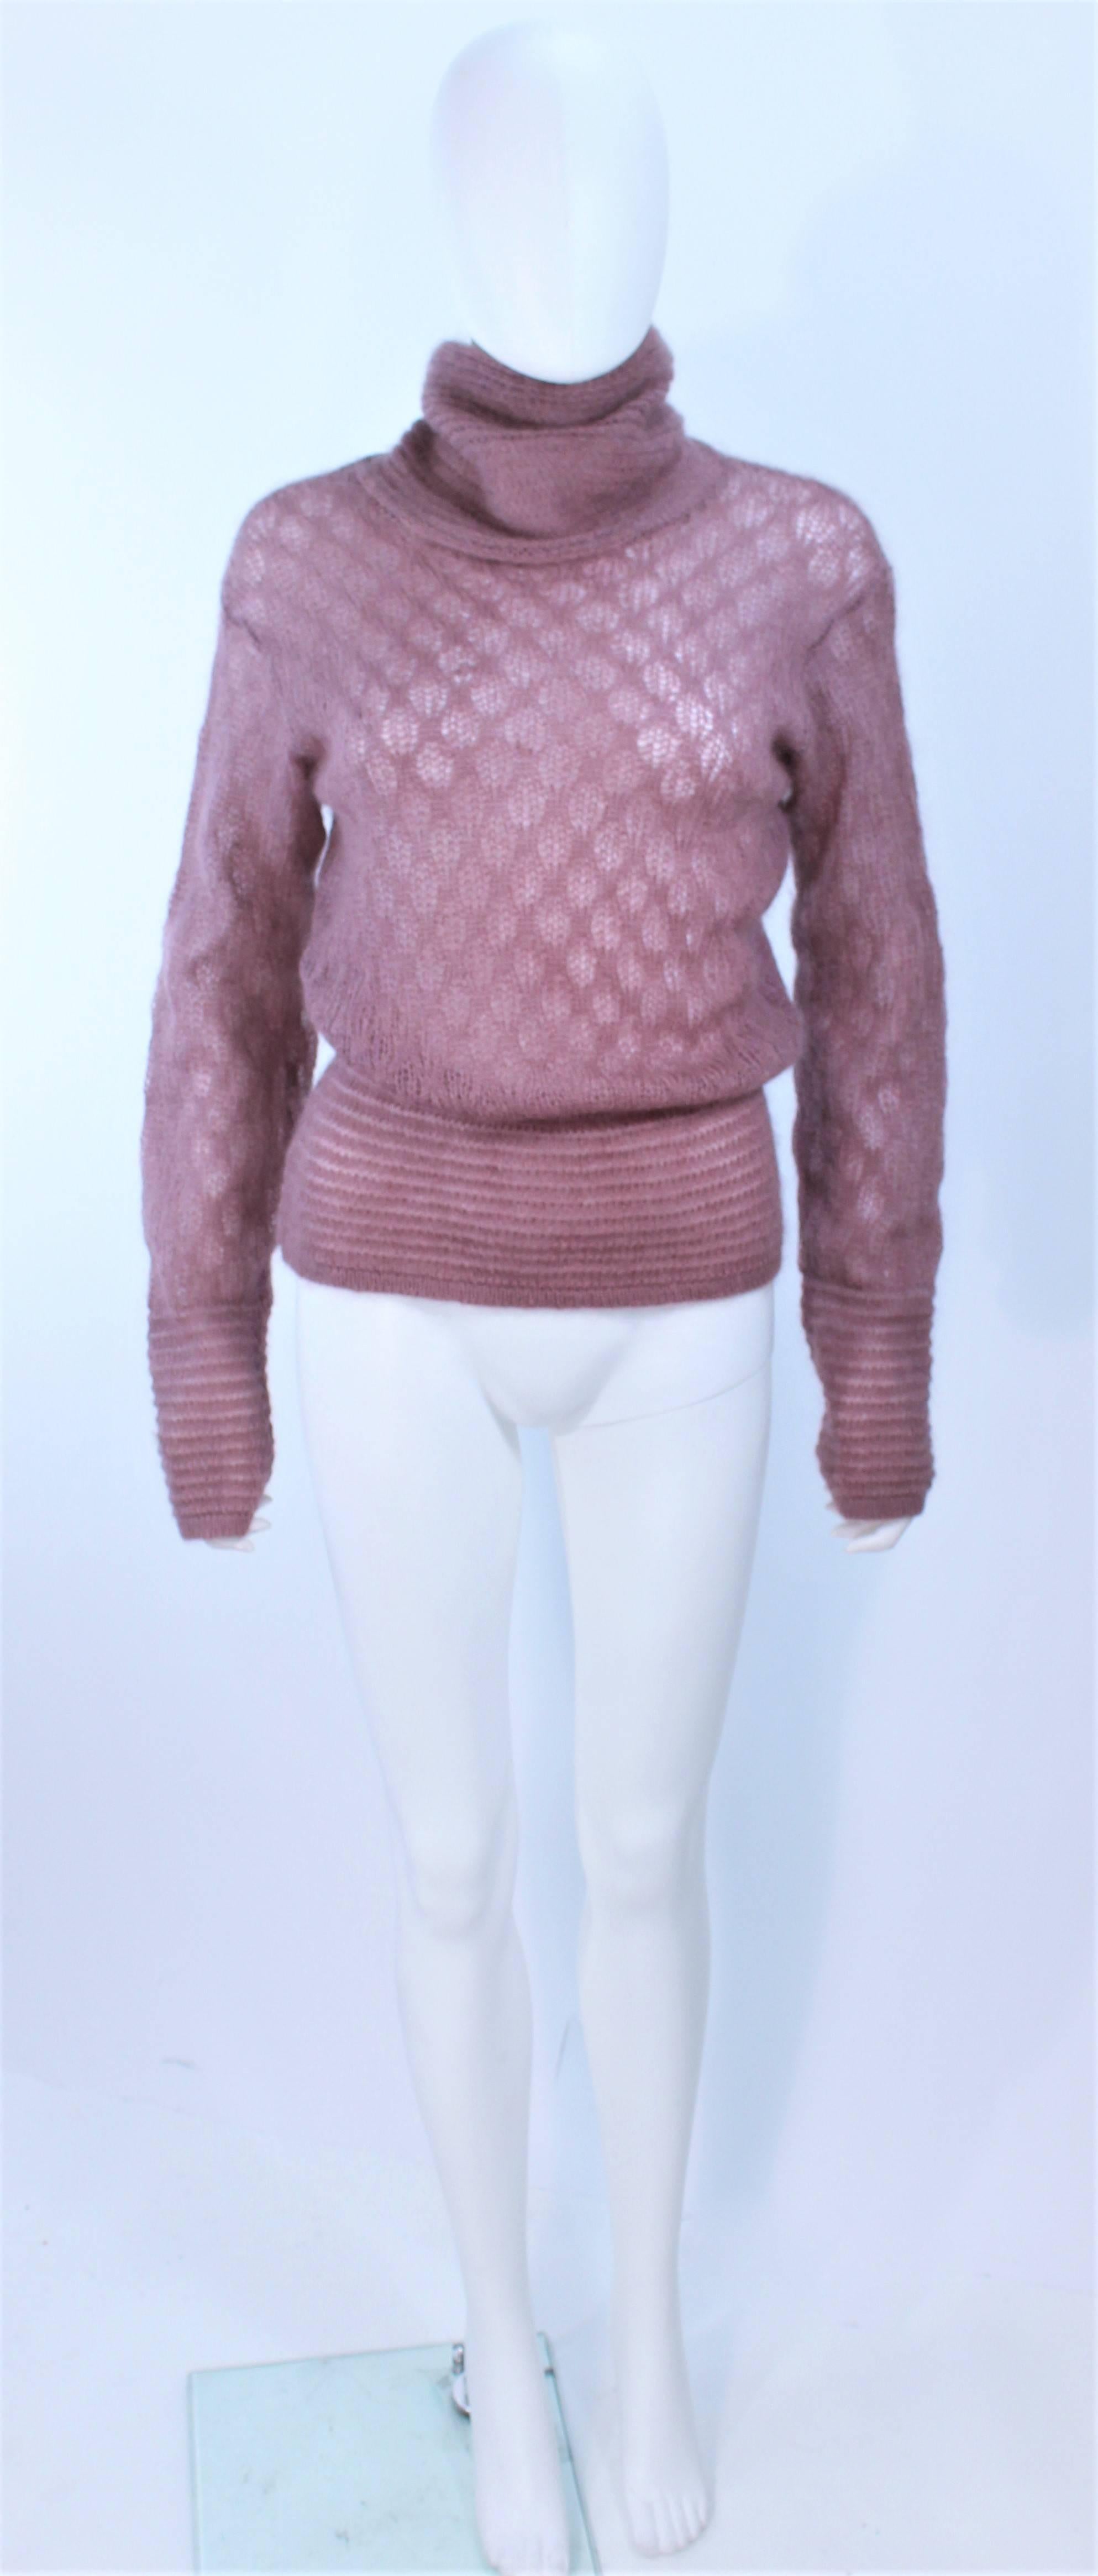 This Missoni design is composed of a mauve knit wool with a semi-sheer design. Features a turtle- cowl neck. In excellent vintage condition.

**Please cross-reference measurements for personal accuracy. Size in description box is an